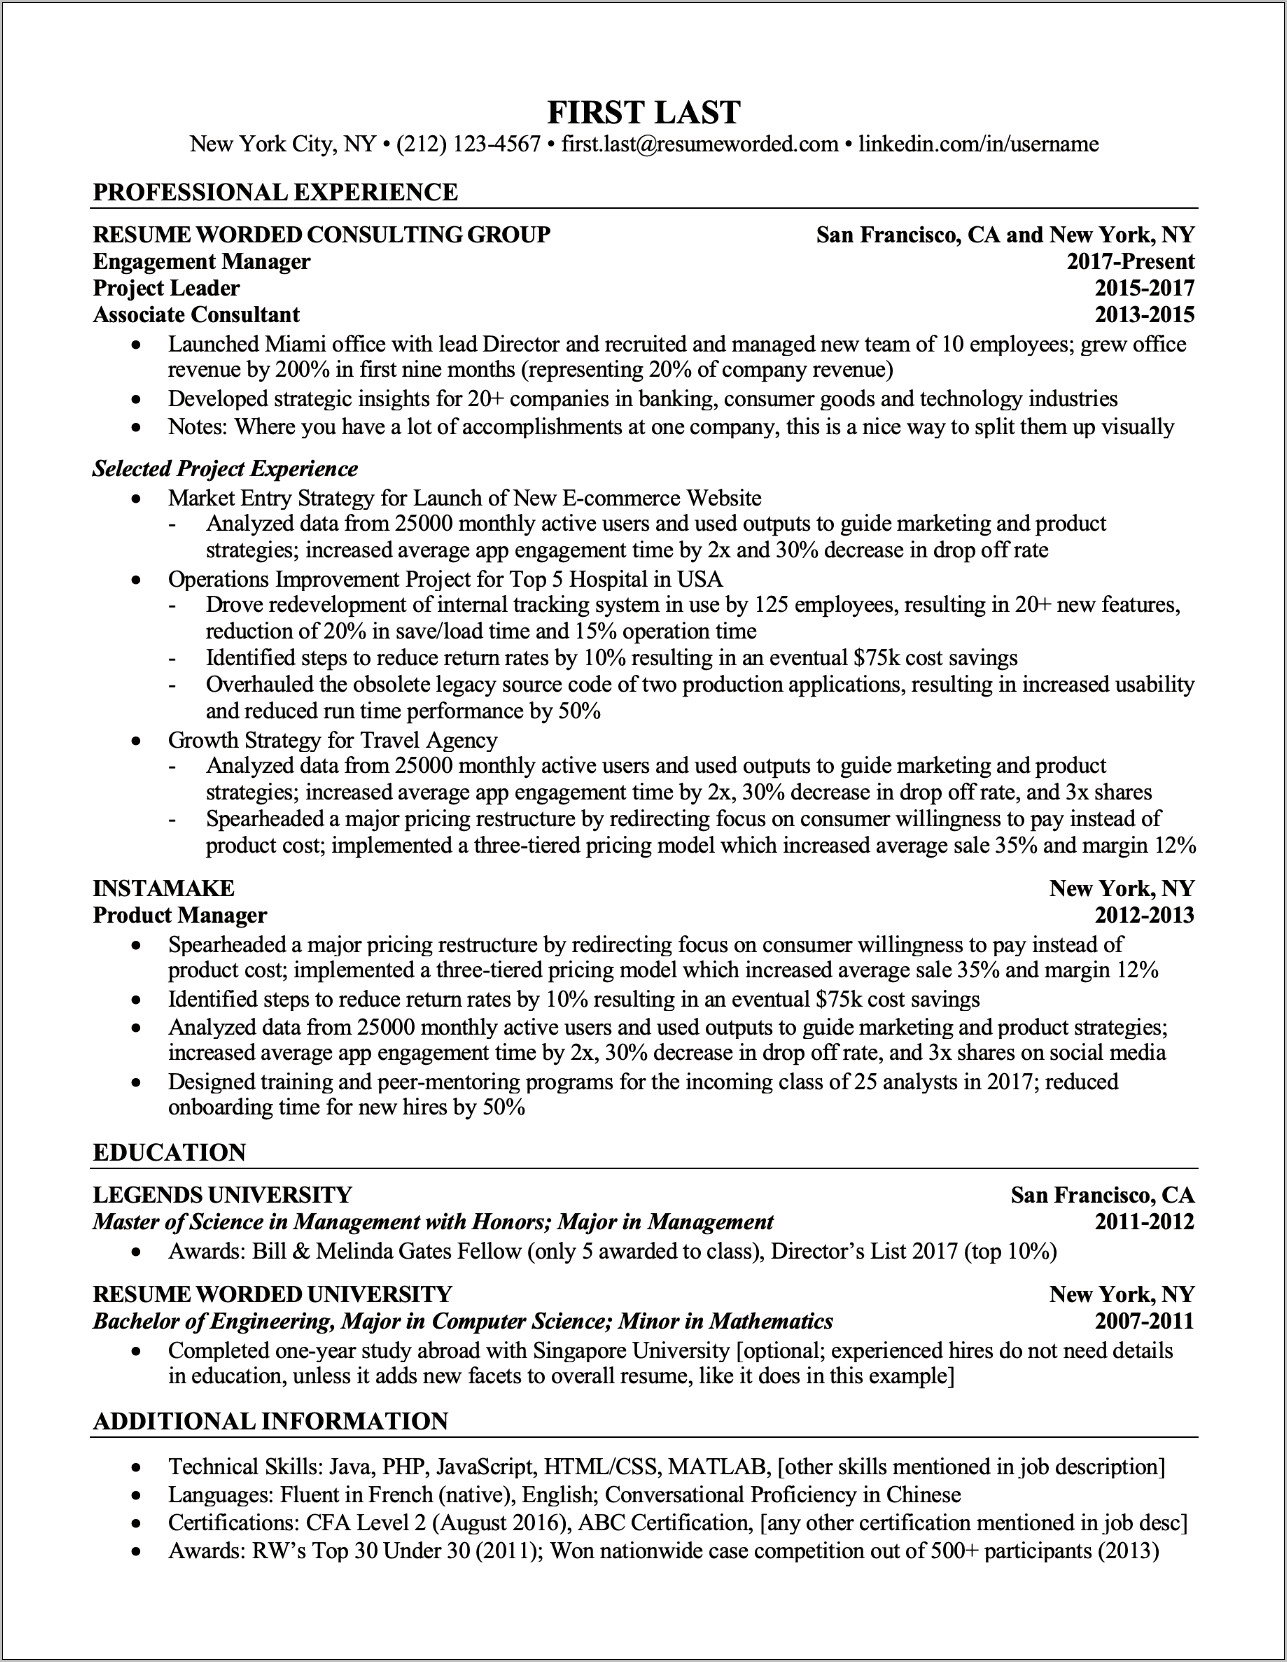 Resume Template For A Midlevel Career Tracher